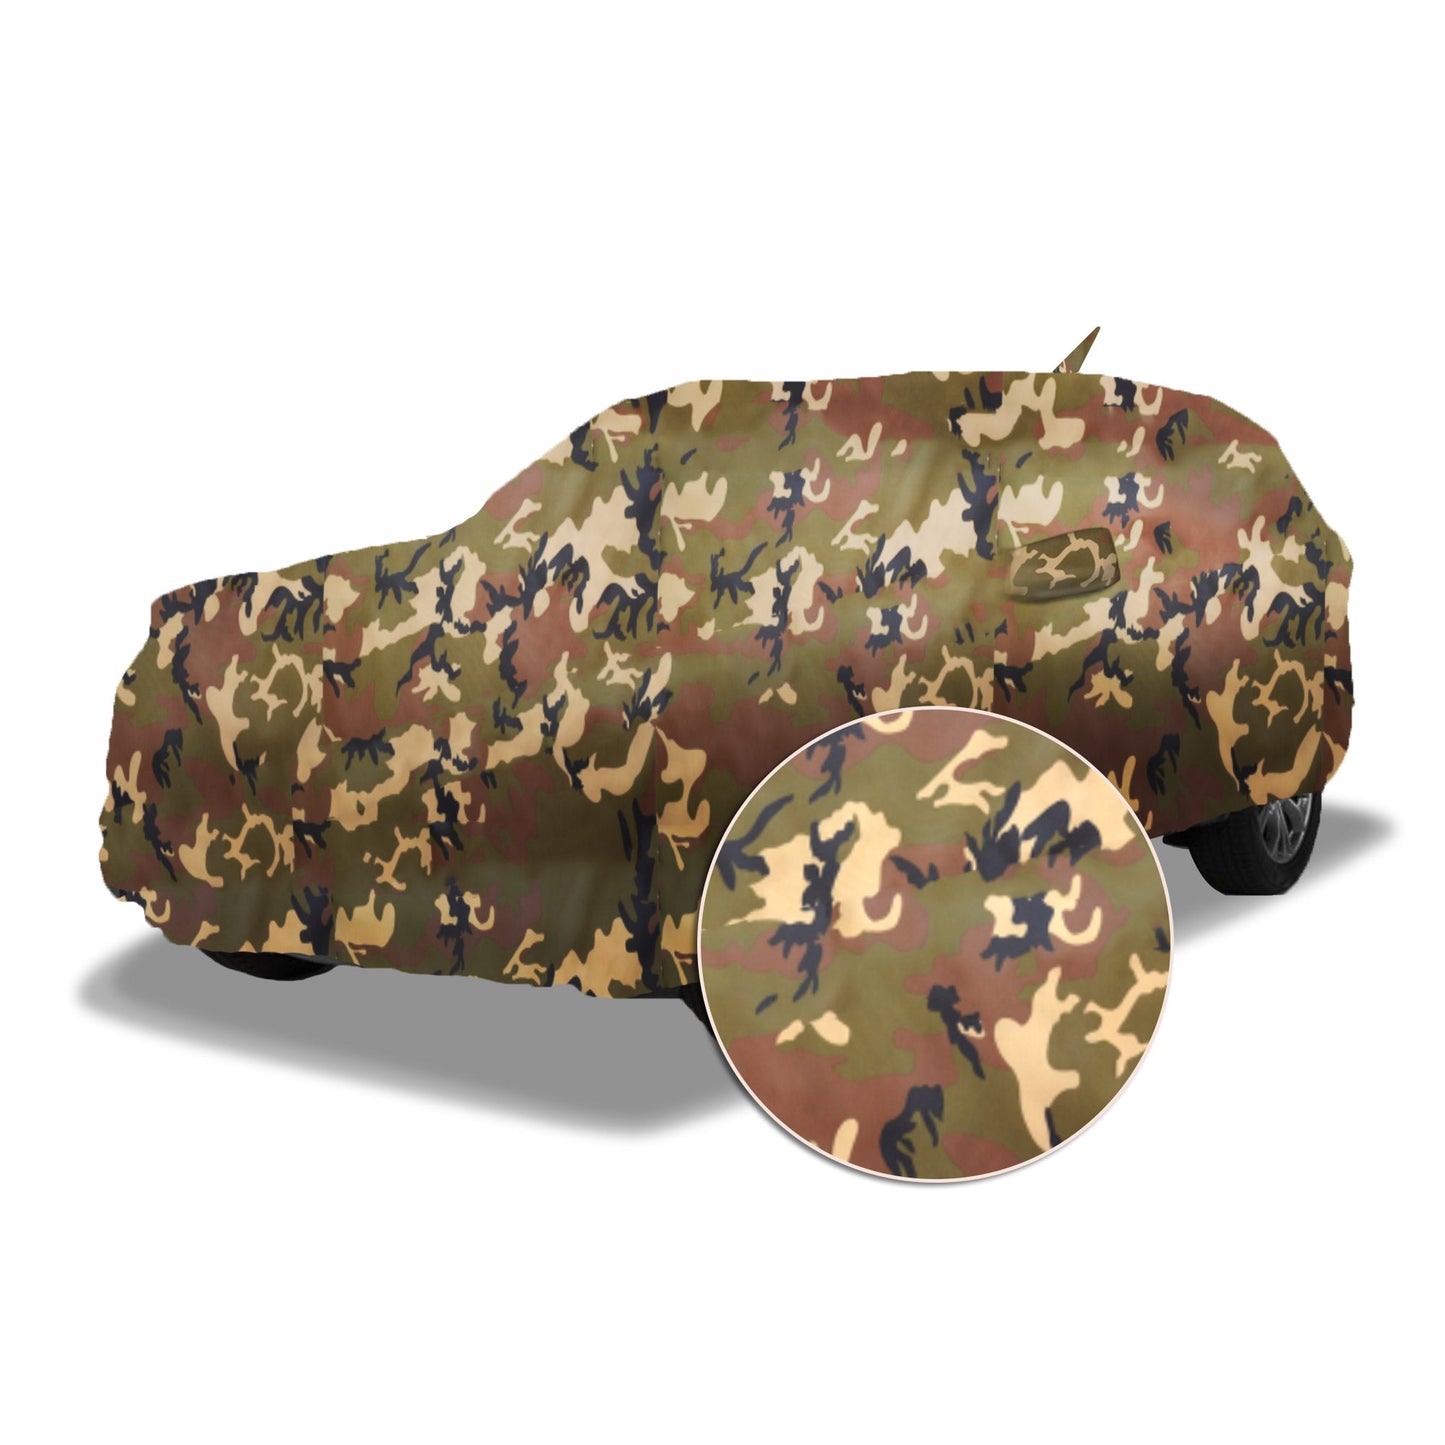 Ascot Volkswagen Polo Matt Edition Car Body Cover Extra Strong & Dust Proof Jungle Military Car Cover with UV Proof & Water-Resistant Coating